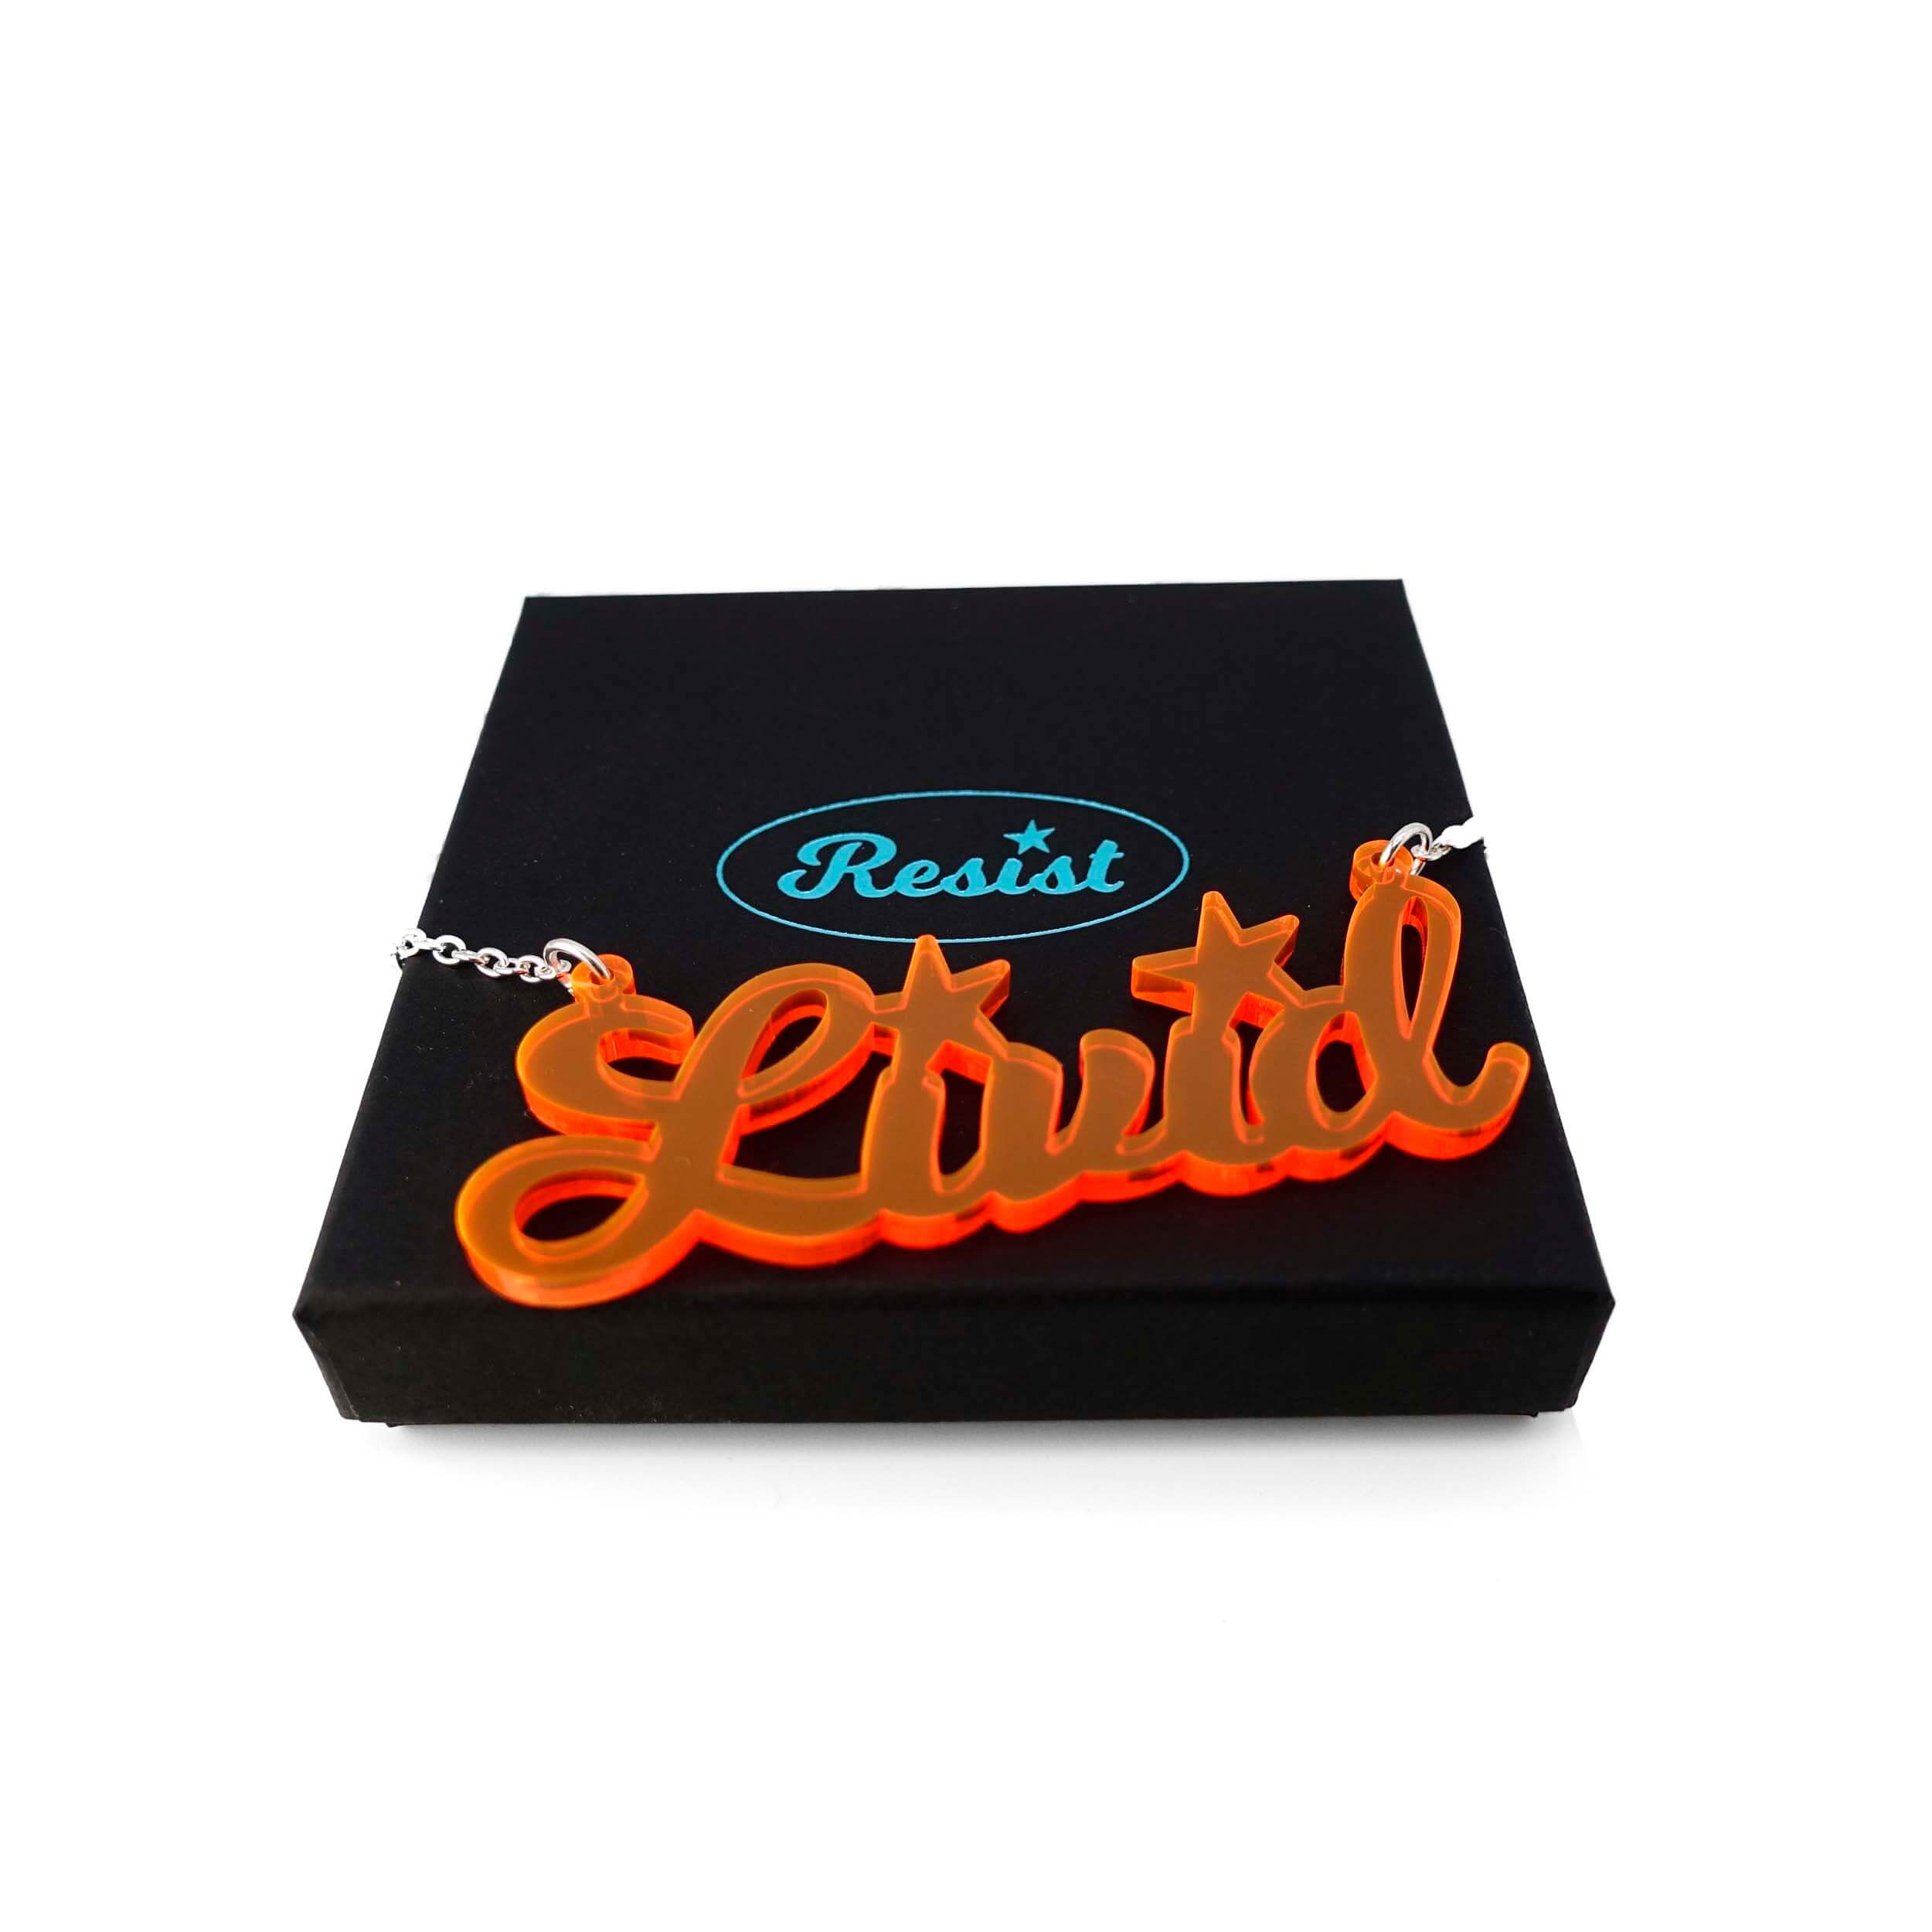 Livid necklace in fluorescent orange shown on a Wear and Resist gift box. 